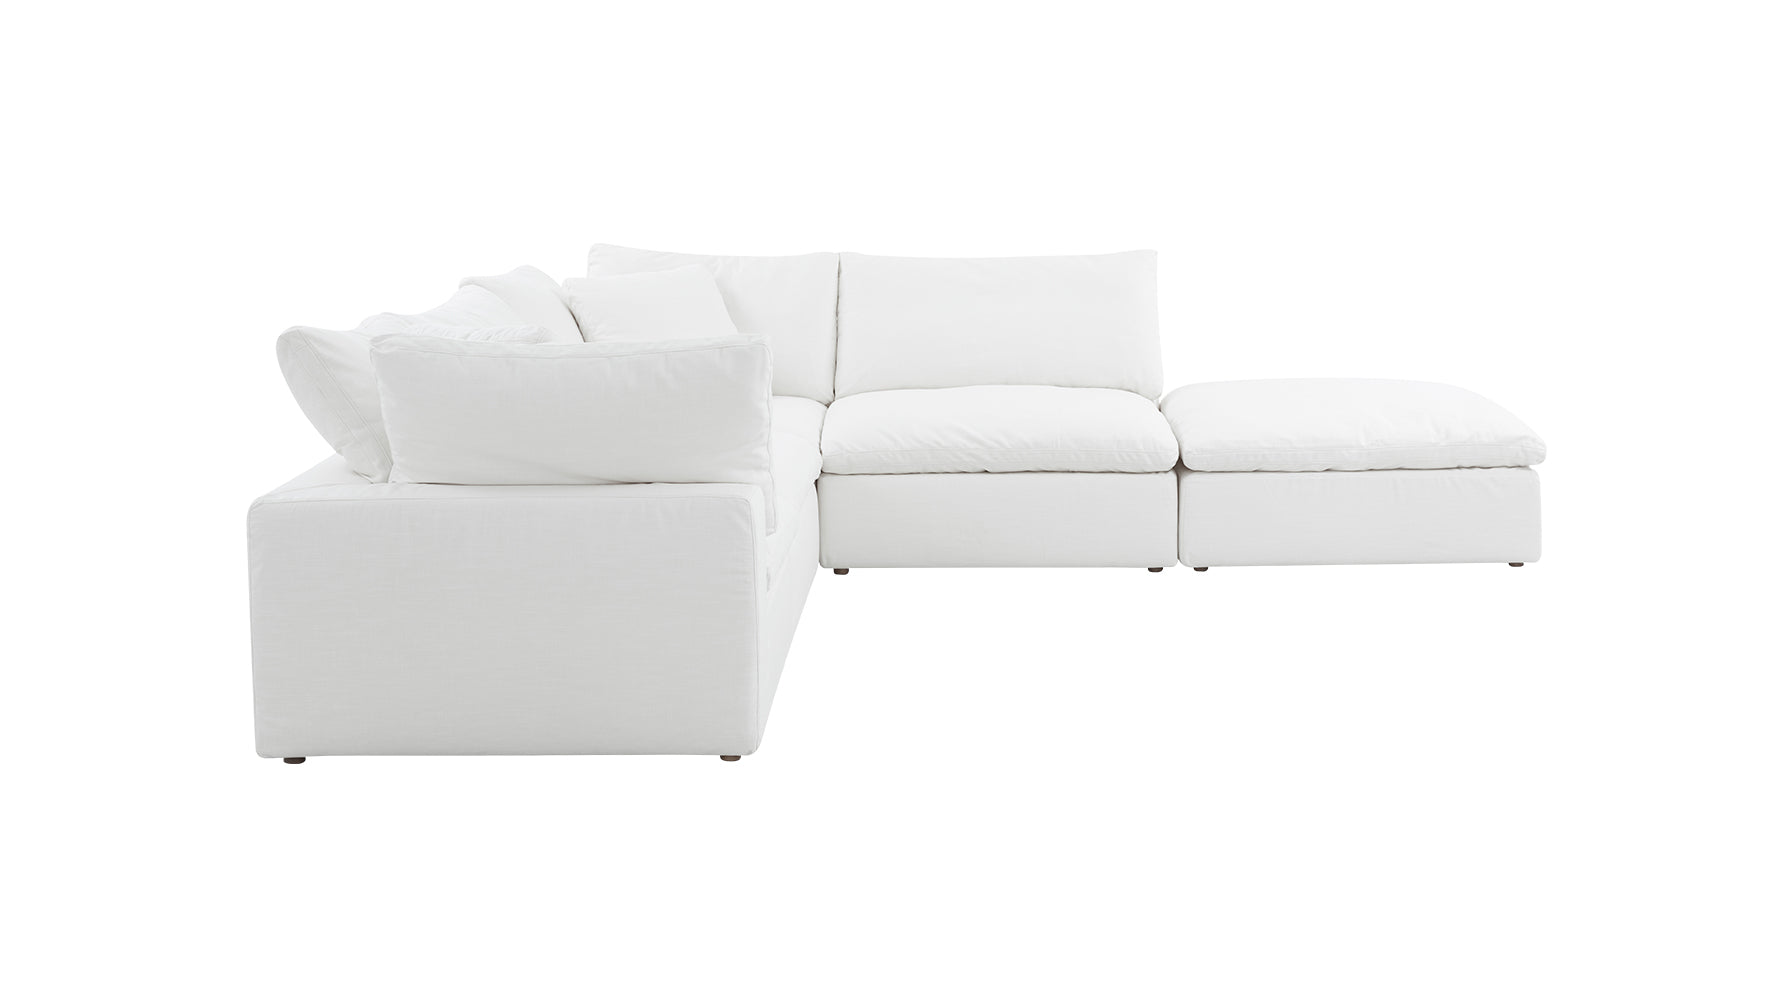 Movie Night™ 5-Piece Modular Sectional, Large, Brie - Image 6